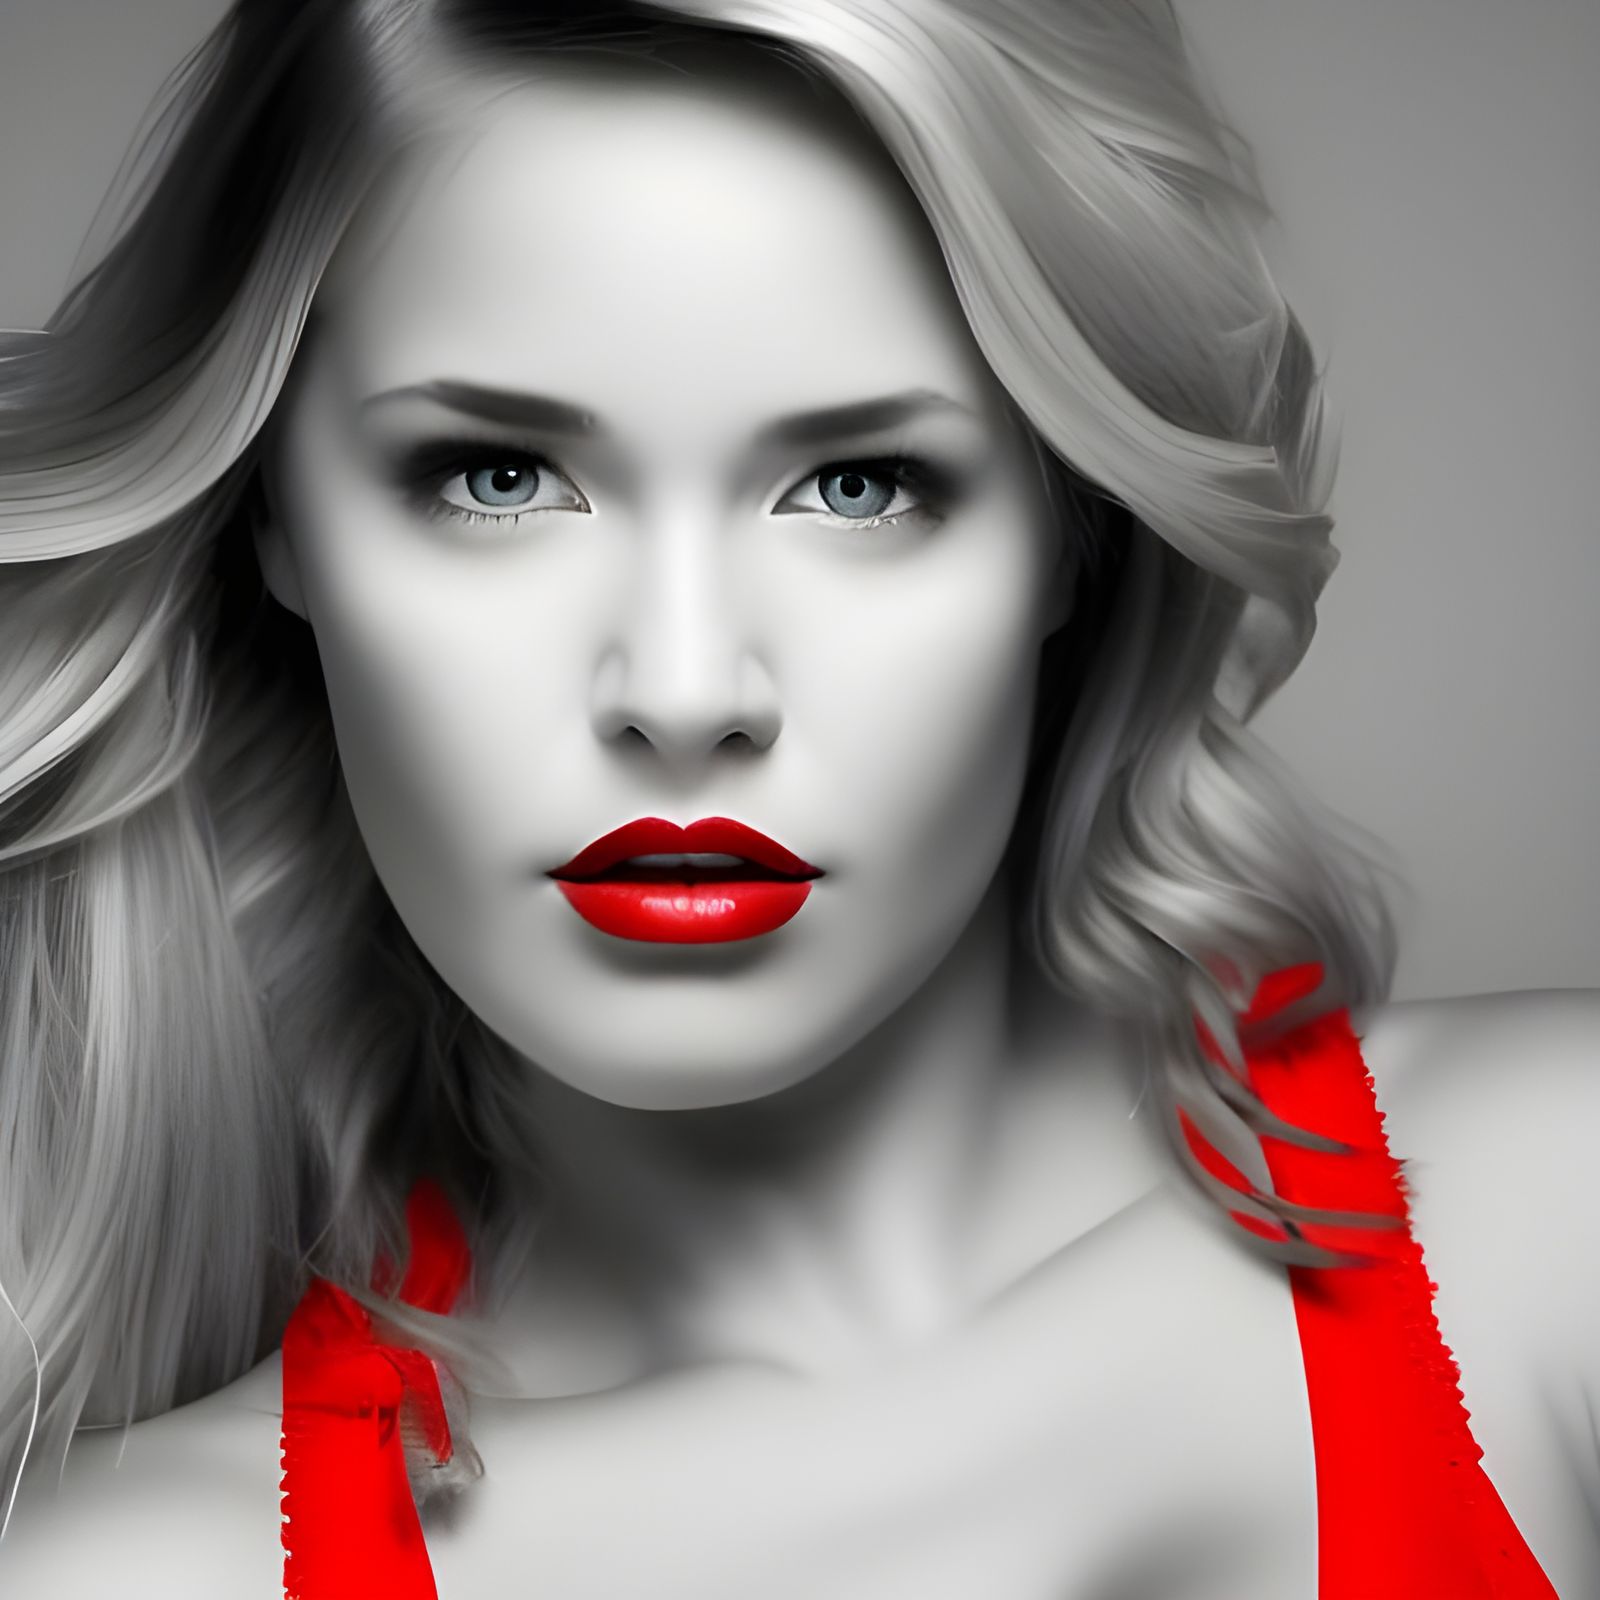 Voluptuous Blonde Fair Skinned Woman Wearing Vibrant Red Dynamic